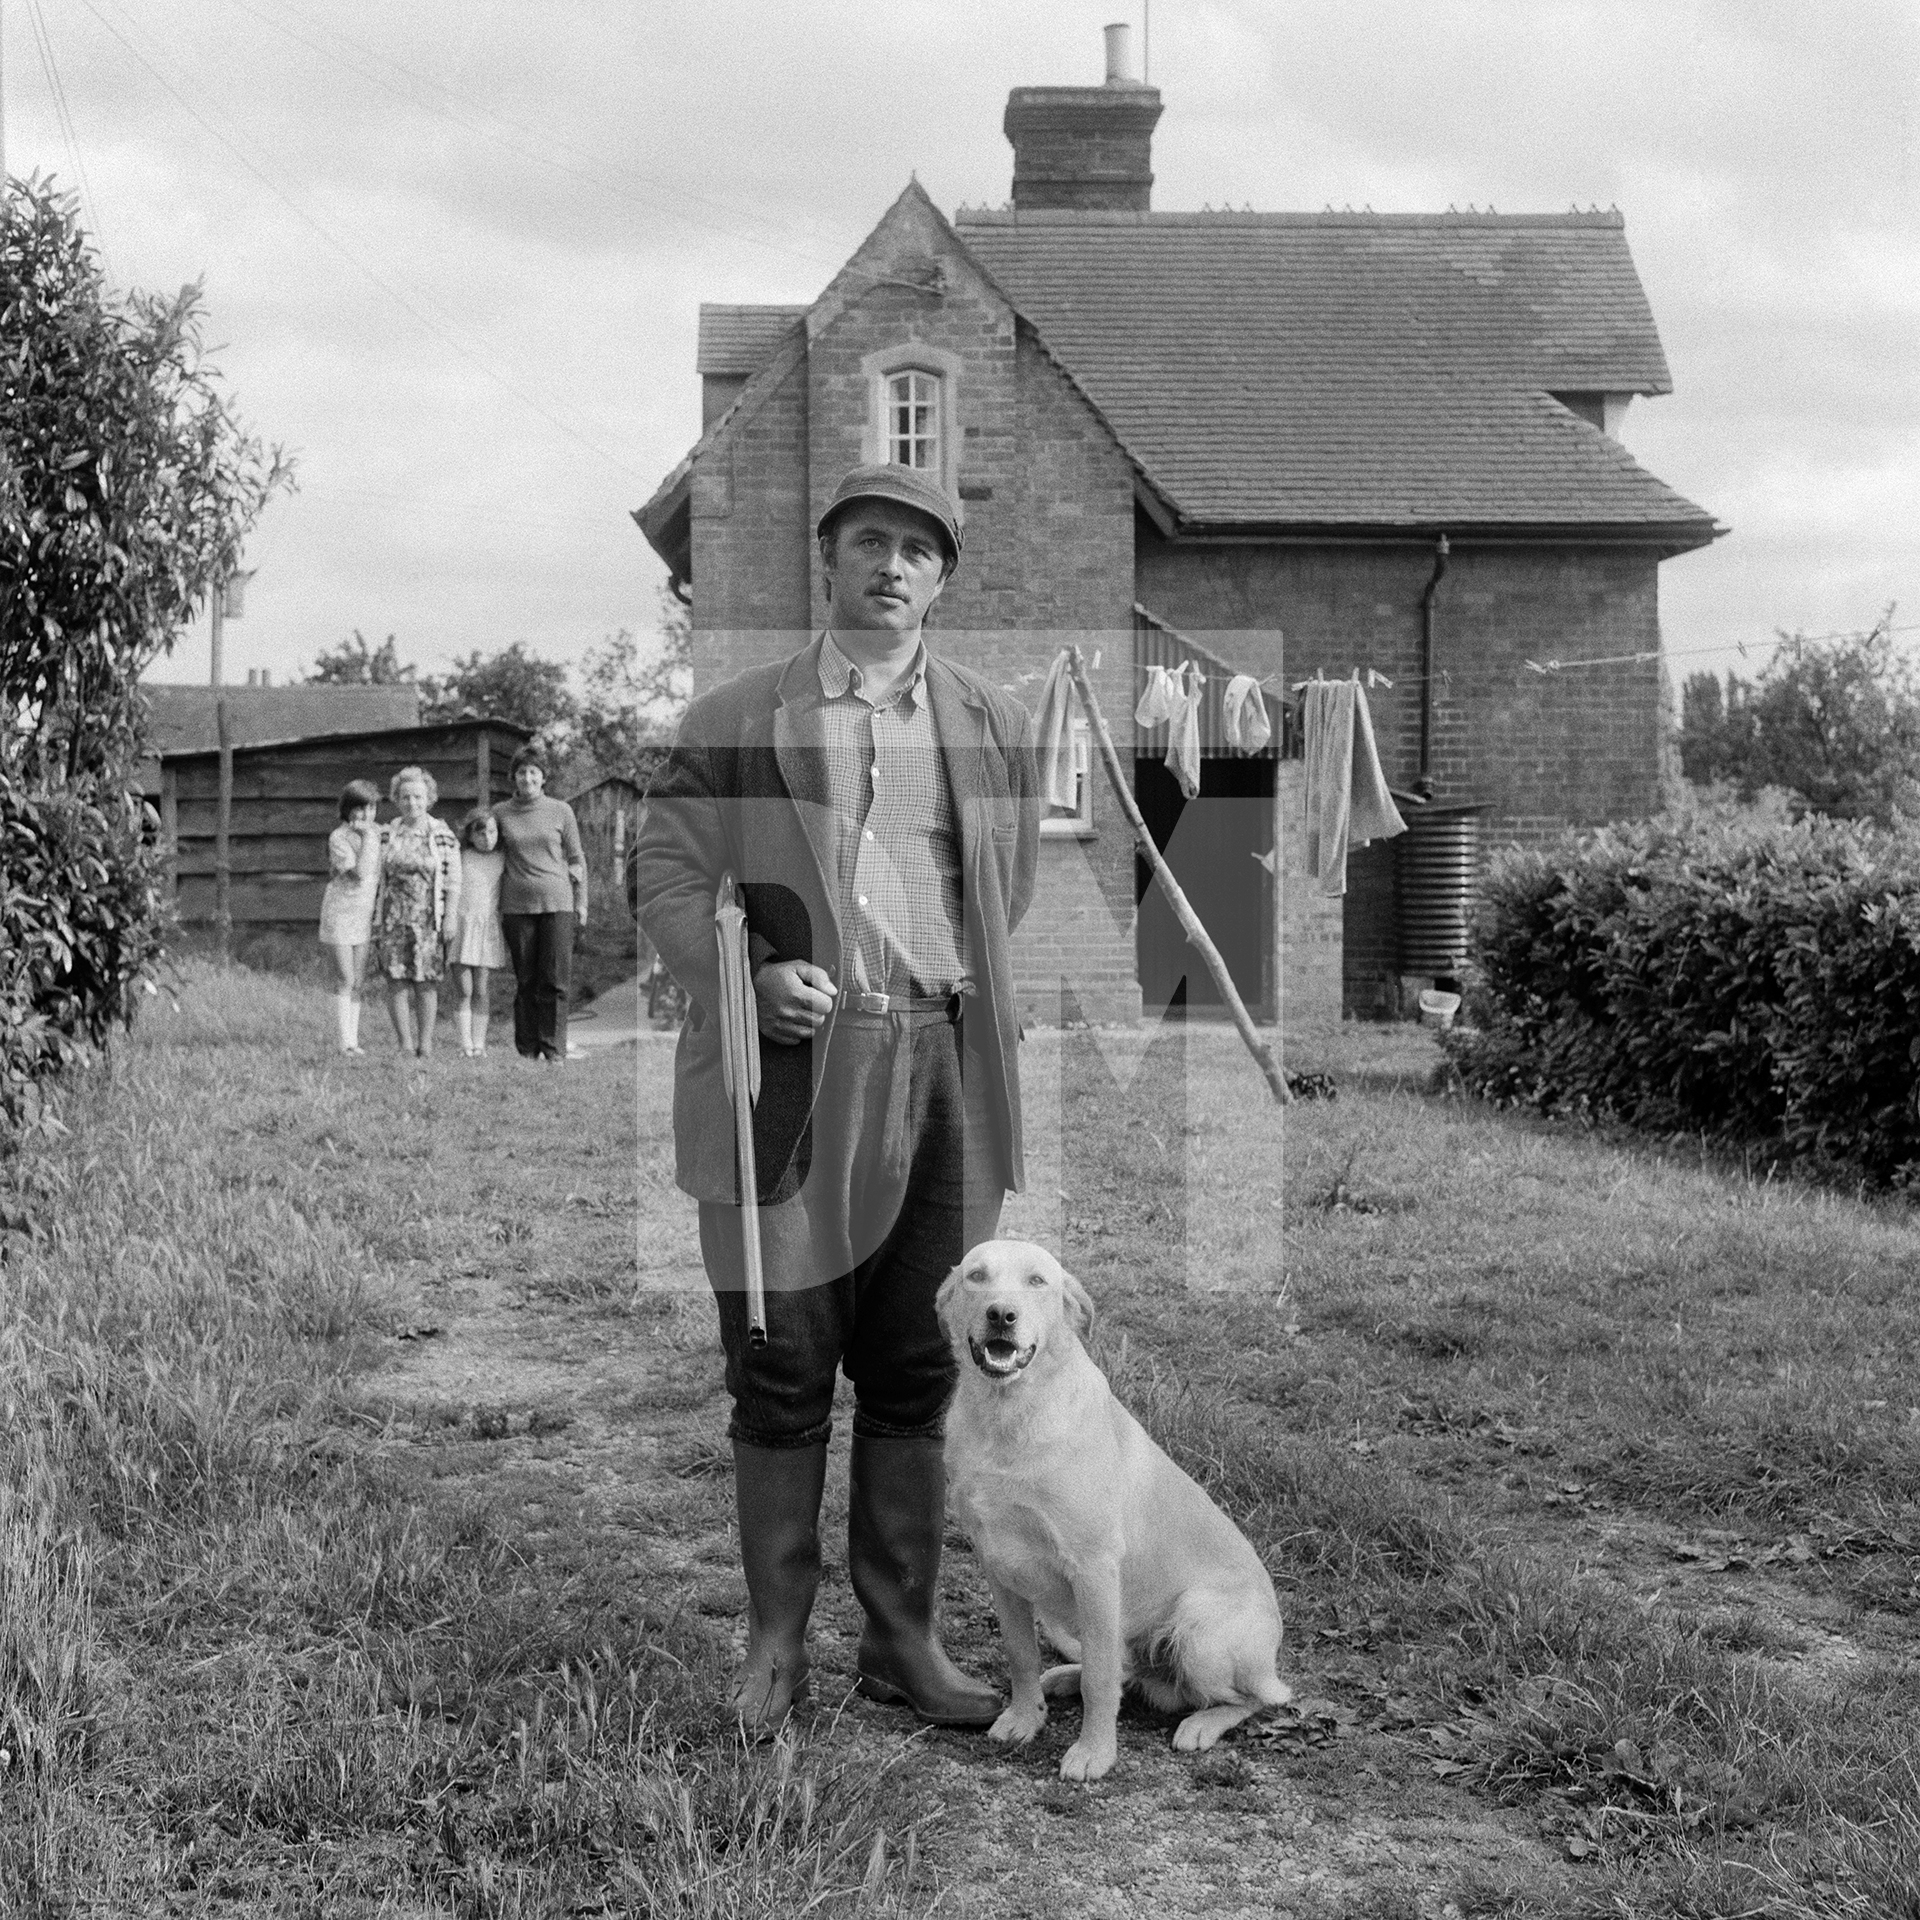 Mike Fitzer, under-keeper, and family, Great Washbourne, Gloucestershire. July 1974 by Daniel Meadows